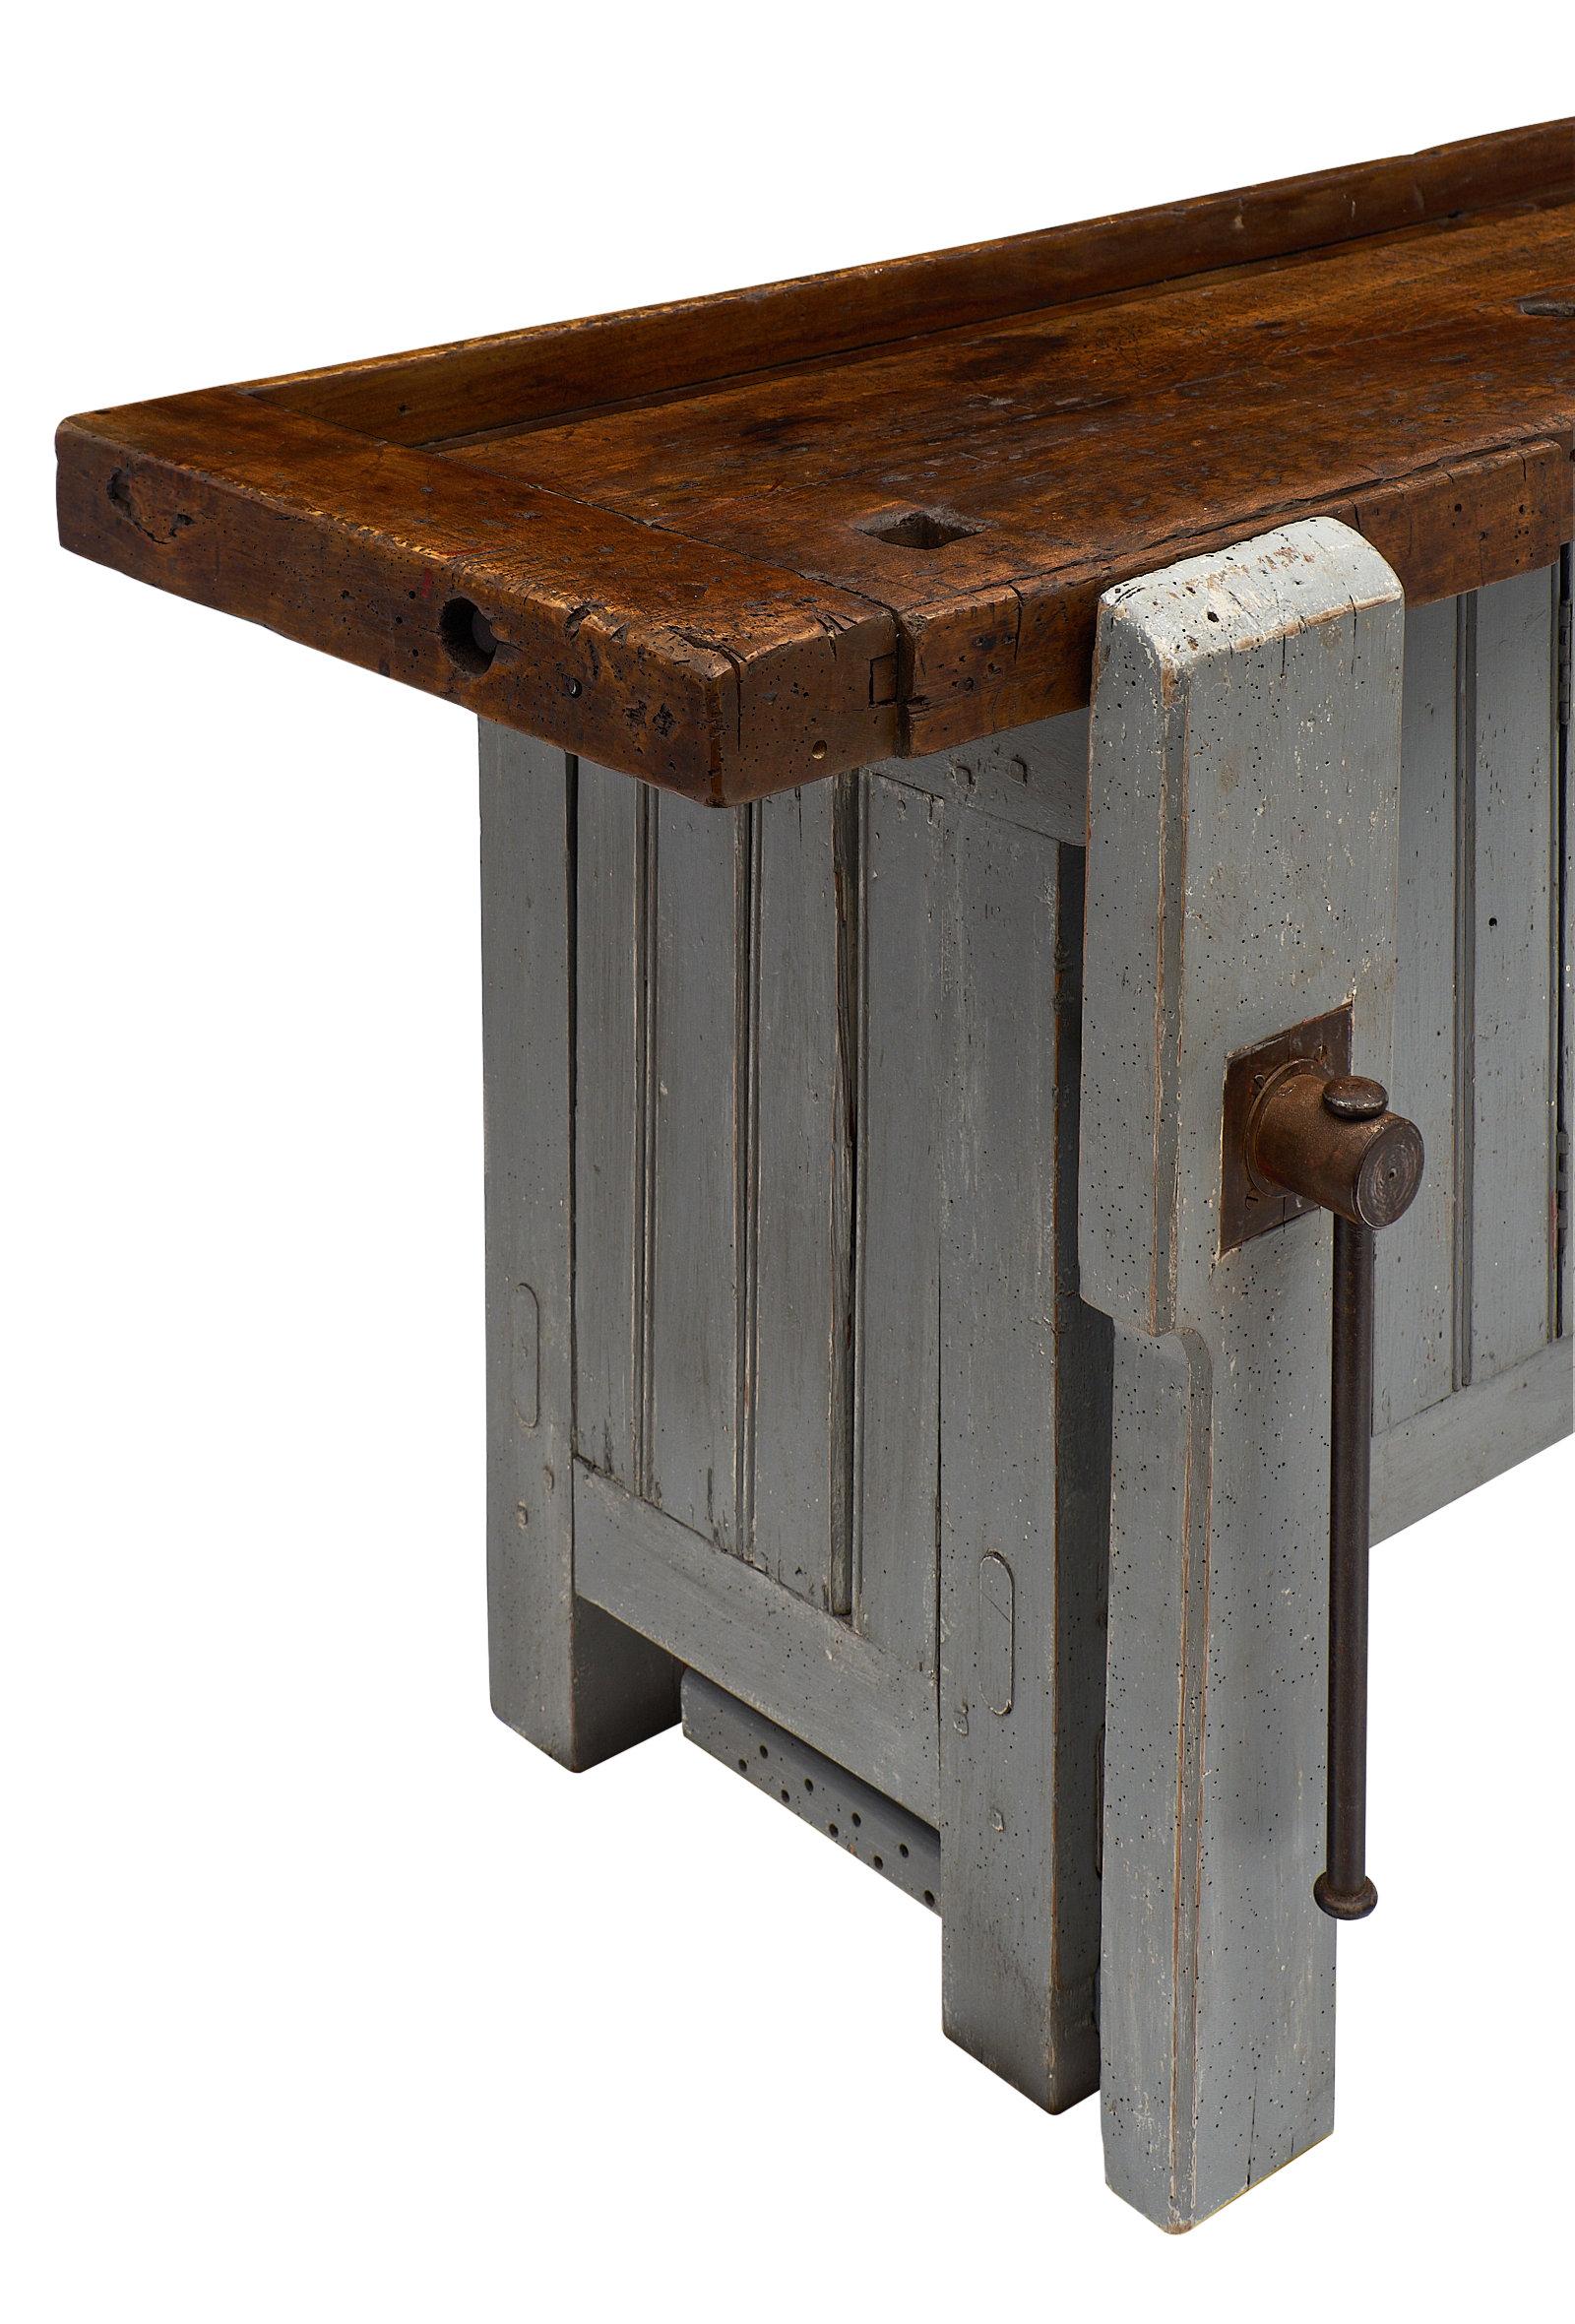 French antique “ski crafting” workbench from the French Alps. We fell in love with this rare ski crafting carpenter workbench made of fir. We couldn’t resist the original painted color, iron vise, and dramatic decorative impact of the piece. There